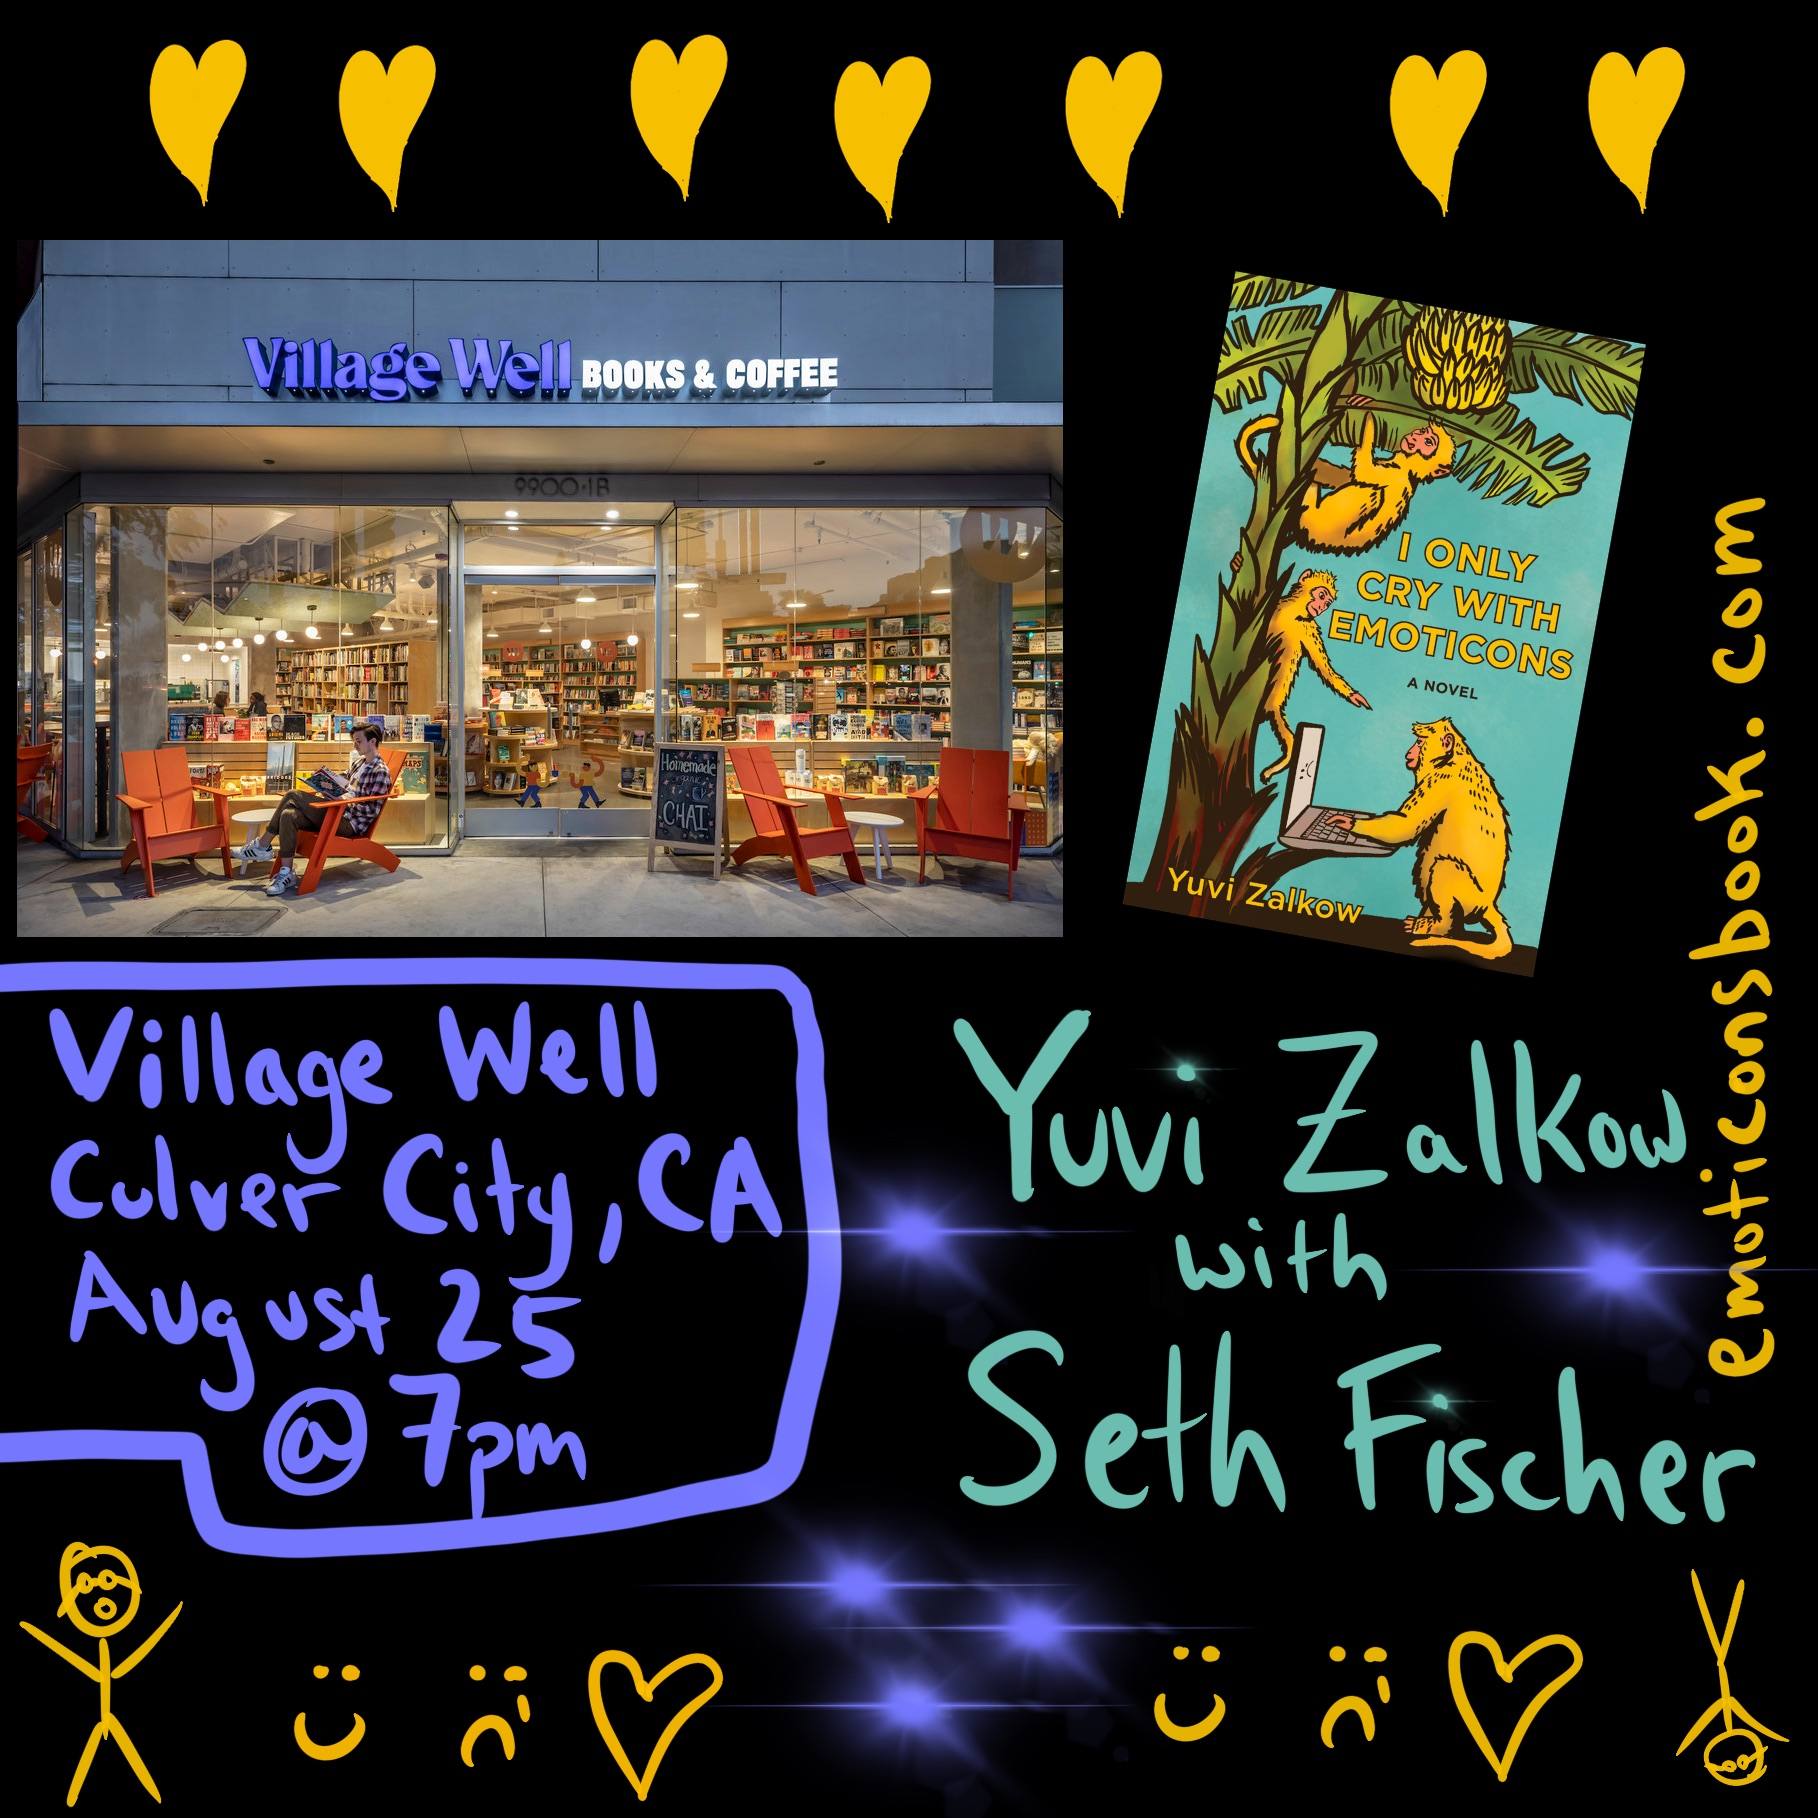 promotional graphic with the Village Well Books and Coffee storefront, handdrawn by Yuvi Zalkow promoting reading event August 25 at 7:00pm